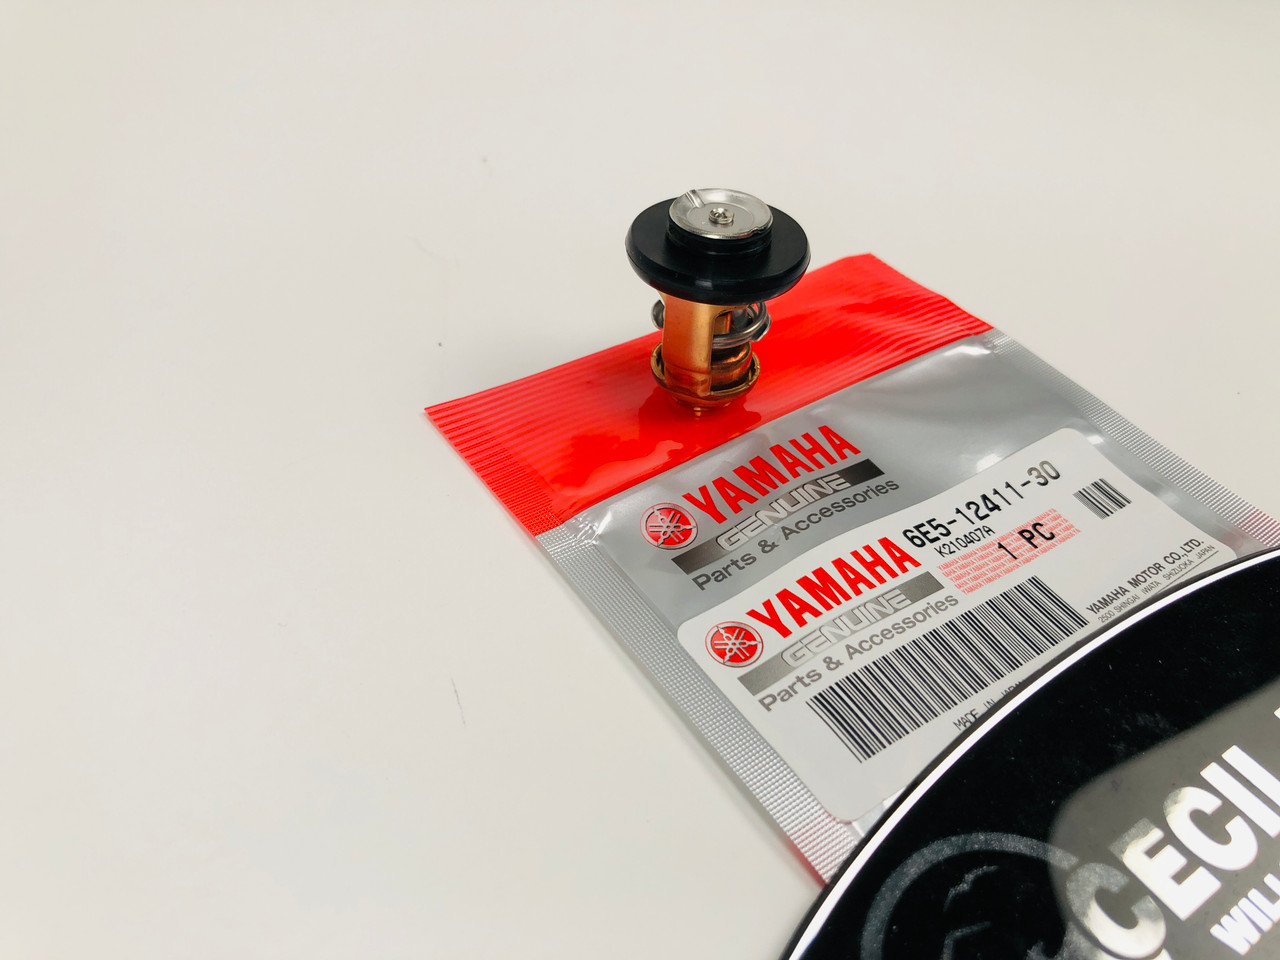 $27.95* GENUINE YAMAHA no tax* THERMOSTAT *In Stock & Ready To Ship!